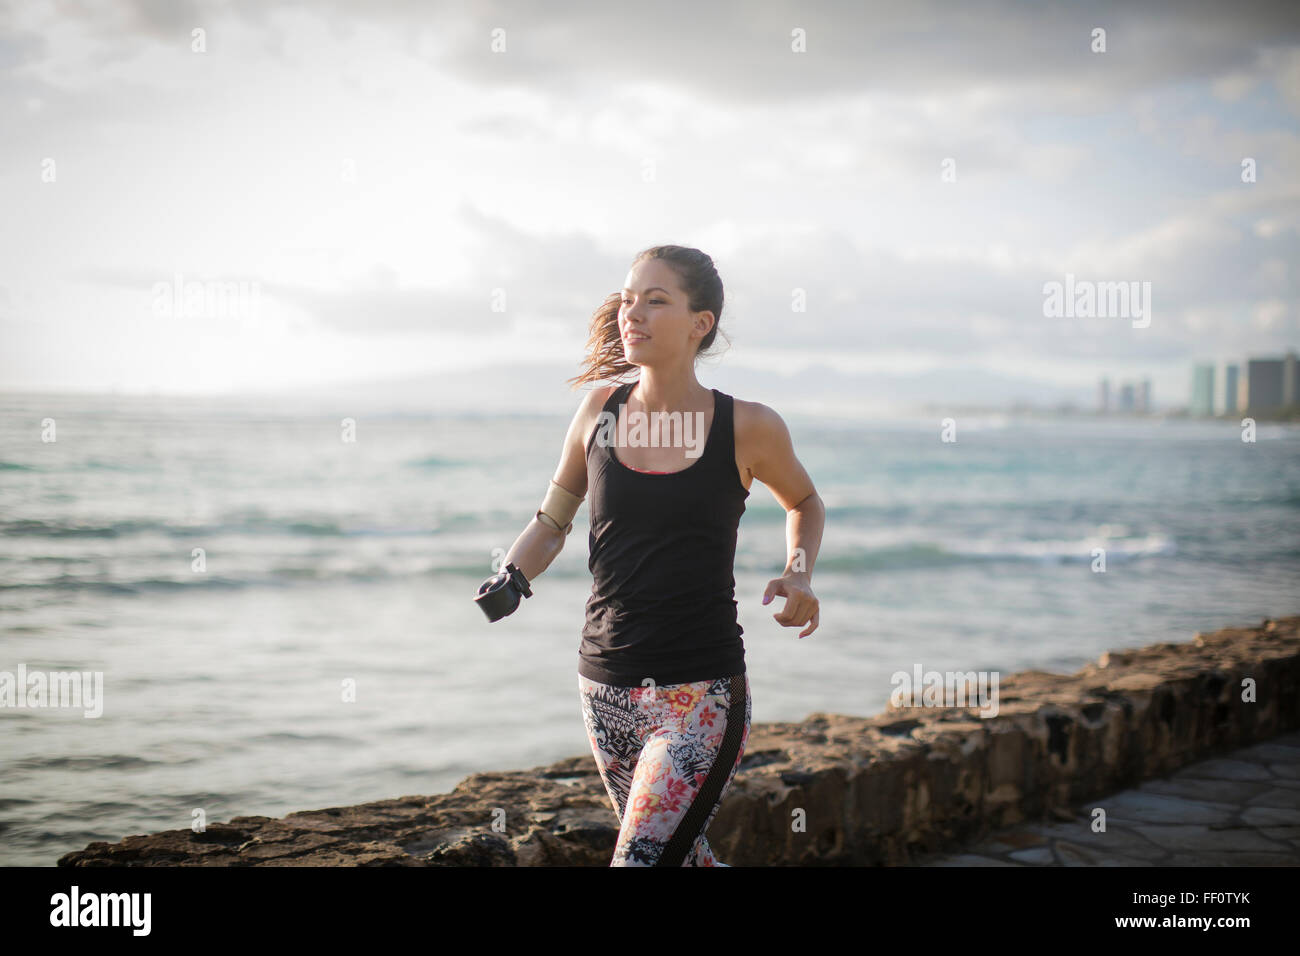 Mixed race amputee athlete jogging on urban waterfront Stock Photo